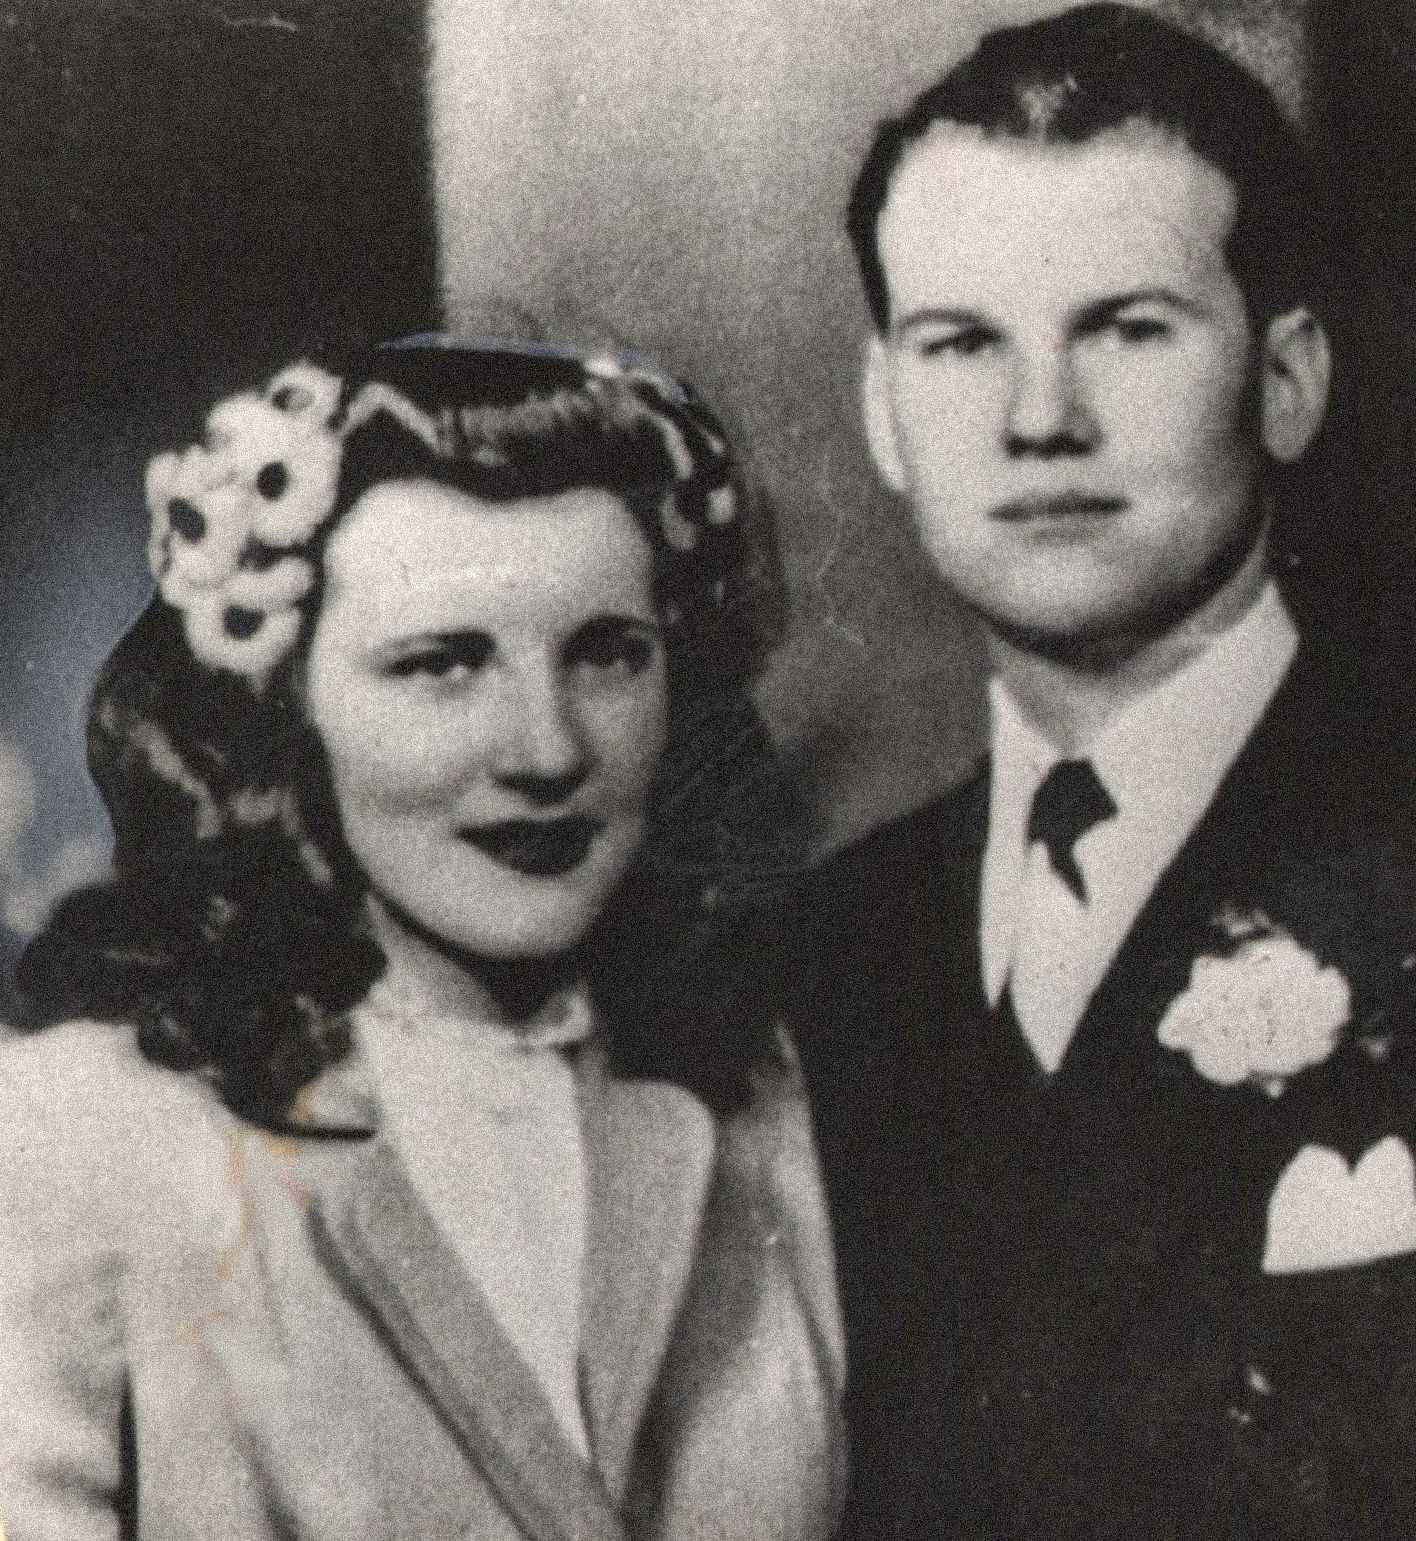 Pictured here are Sam and Marilyn Sheppard, a young and seemingly happy couple. The two wed on February 21, 1945 and had one child together, Sam Reese Sheppard. Marilyn was pregnant with her second child at the time of her murder.